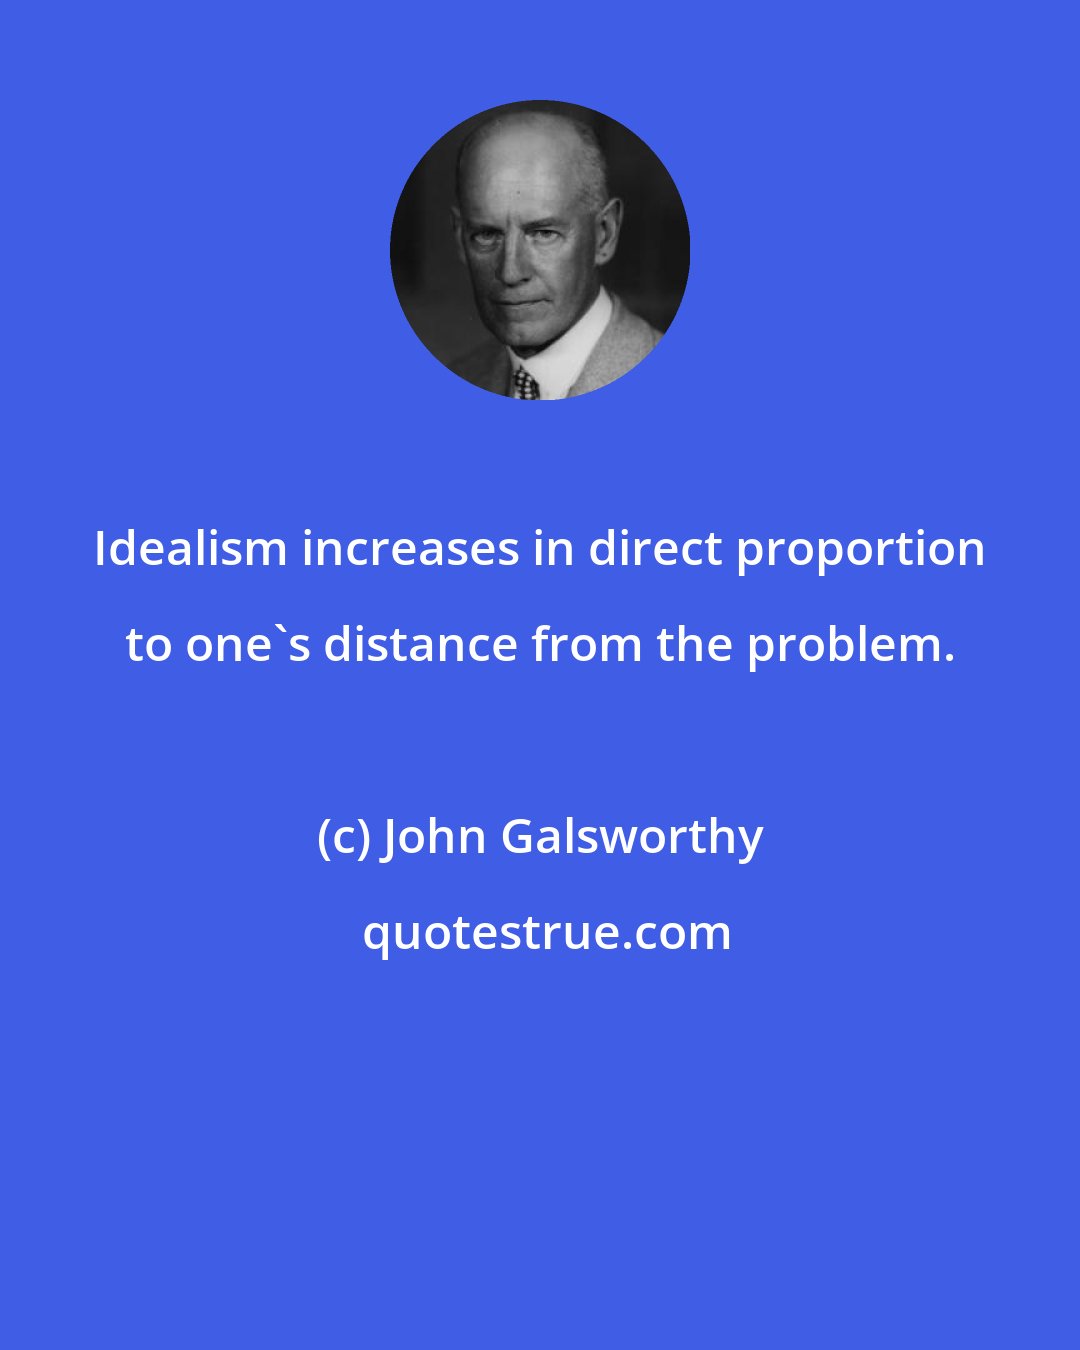 John Galsworthy: Idealism increases in direct proportion to one's distance from the problem.